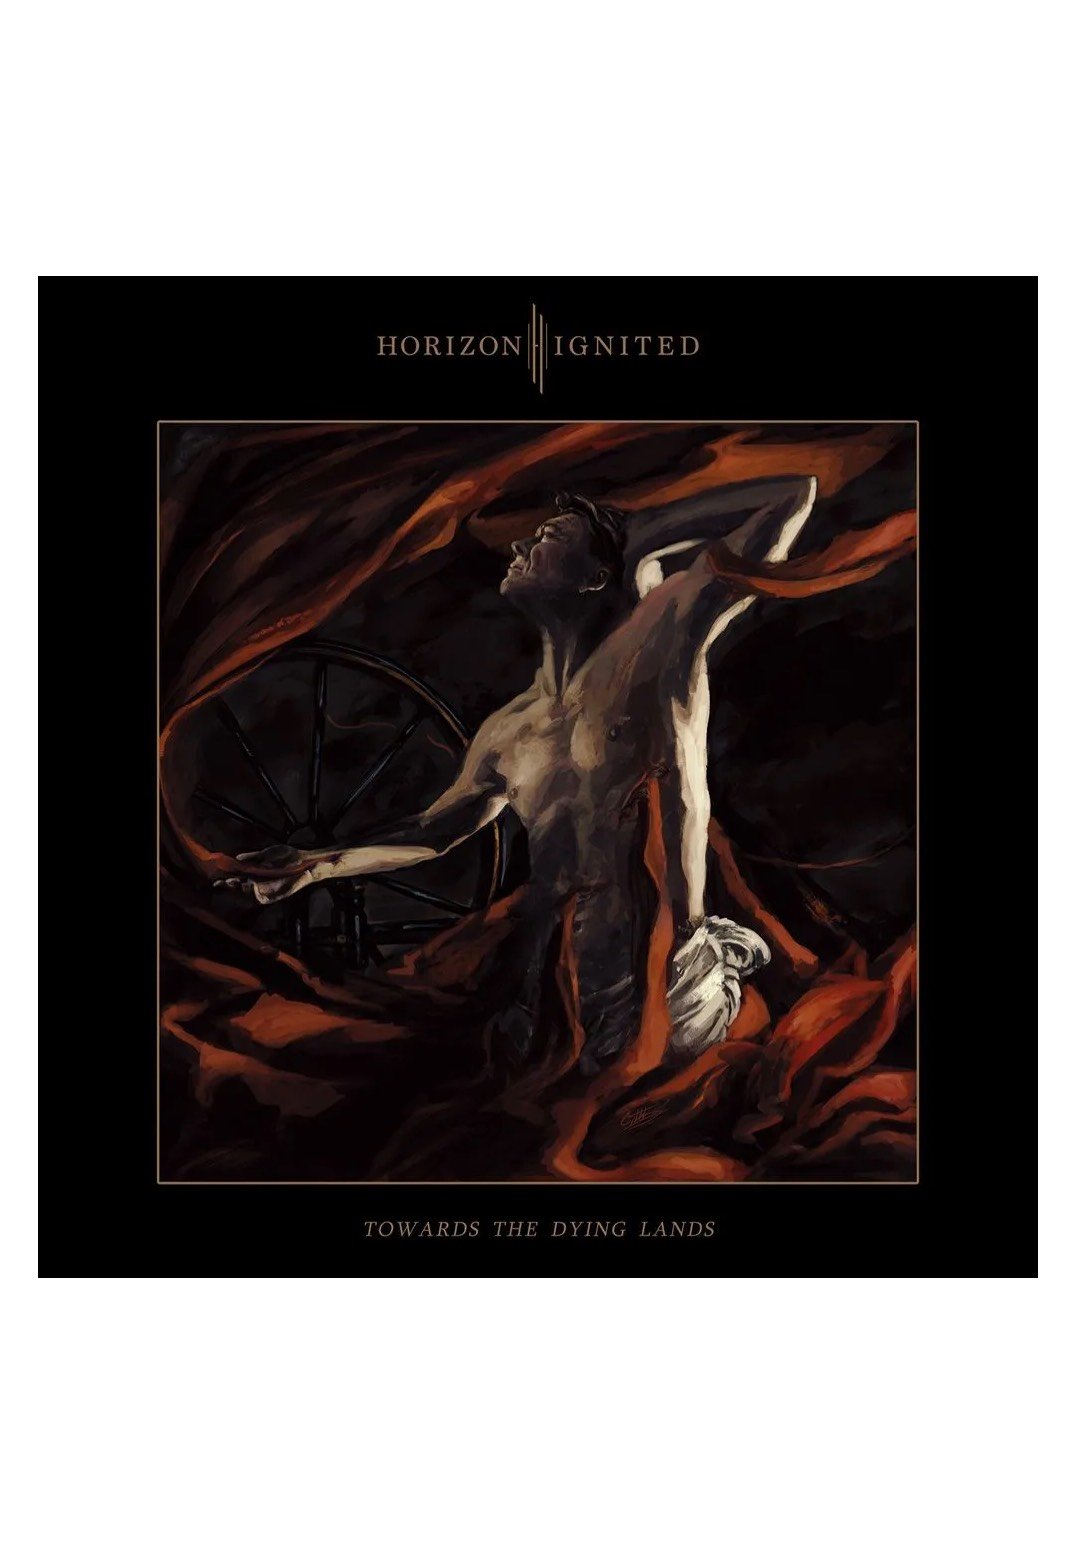 Horizon Ignited - Towards The Dying Lands - CD